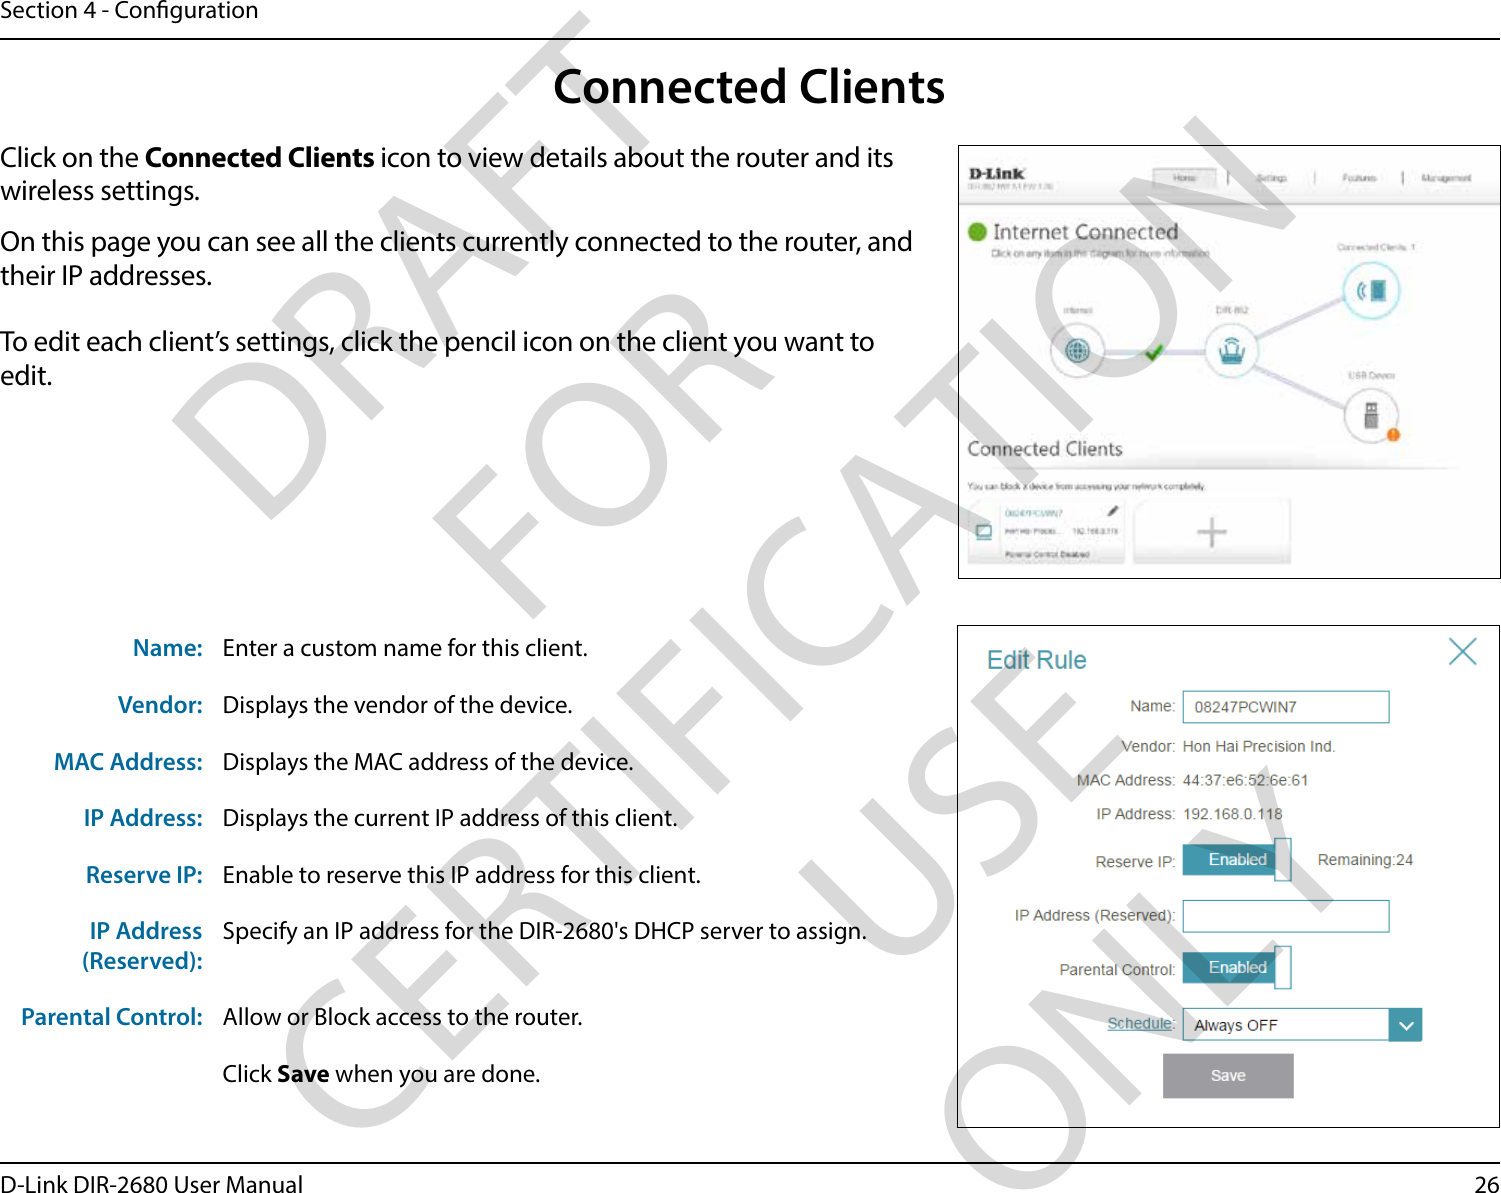 26D-Link DIR-2680 User ManualSection 4 - CongurationConnected ClientsClick on the Connected Clients icon to view details about the router and its wireless settings.On this page you can see all the clients currently connected to the router, and their IP addresses.To edit each client’s settings, click the pencil icon on the client you want to edit.Name: Enter a custom name for this client.Vendor: Displays the vendor of the device.MAC Address: Displays the MAC address of the device.IP Address: Displays the current IP address of this client.Reserve IP: Enable to reserve this IP address for this client.IP Address (Reserved):Specify an IP address for the DIR-2680&apos;s DHCP server to assign.Parental Control: Allow or Block access to the router.Click Save when you are done.DRAFT FOR CERTIFICATION USE ONLY